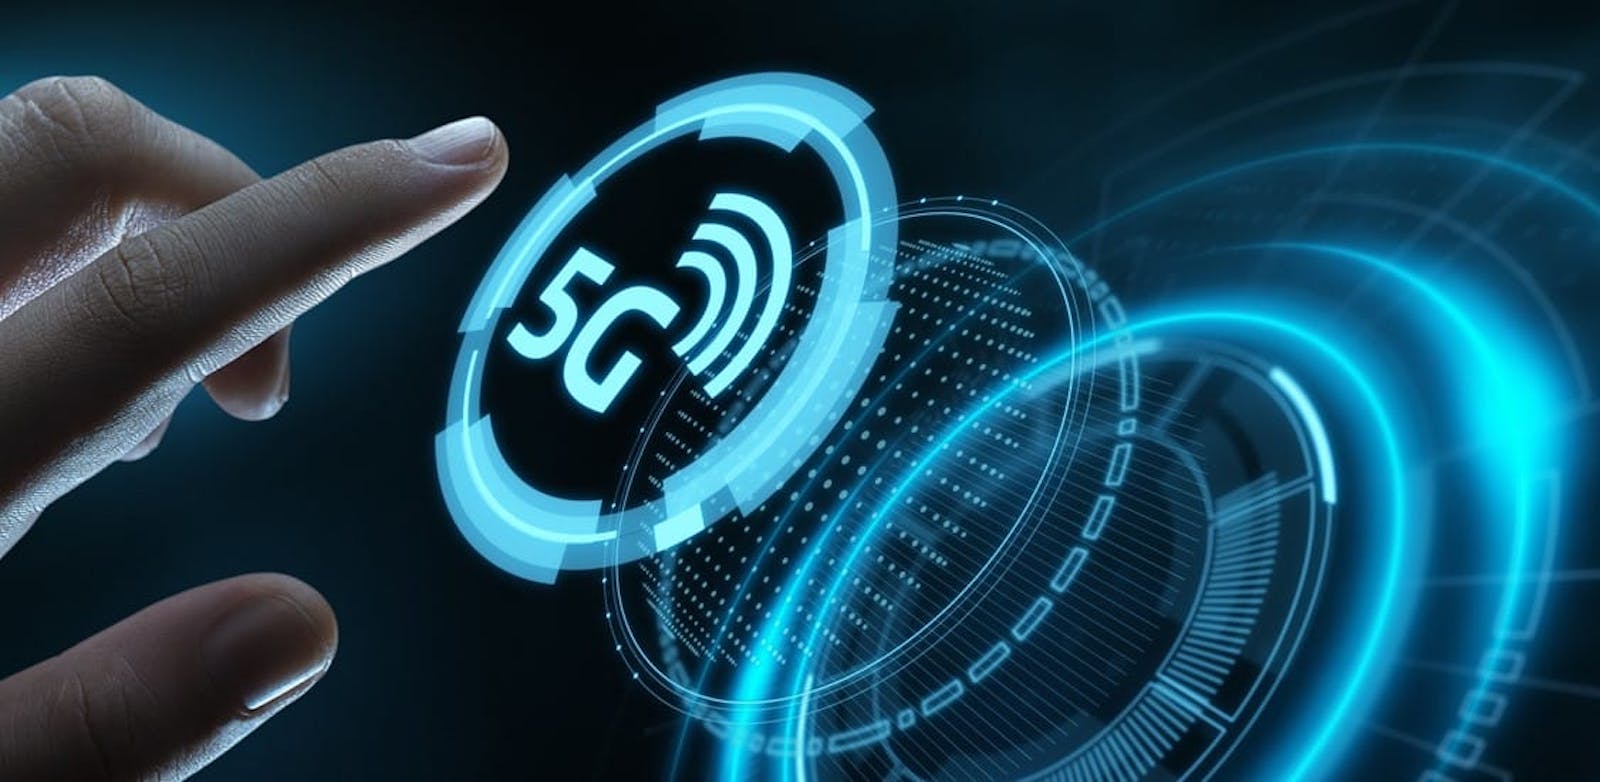 5G Technology and Its Potential